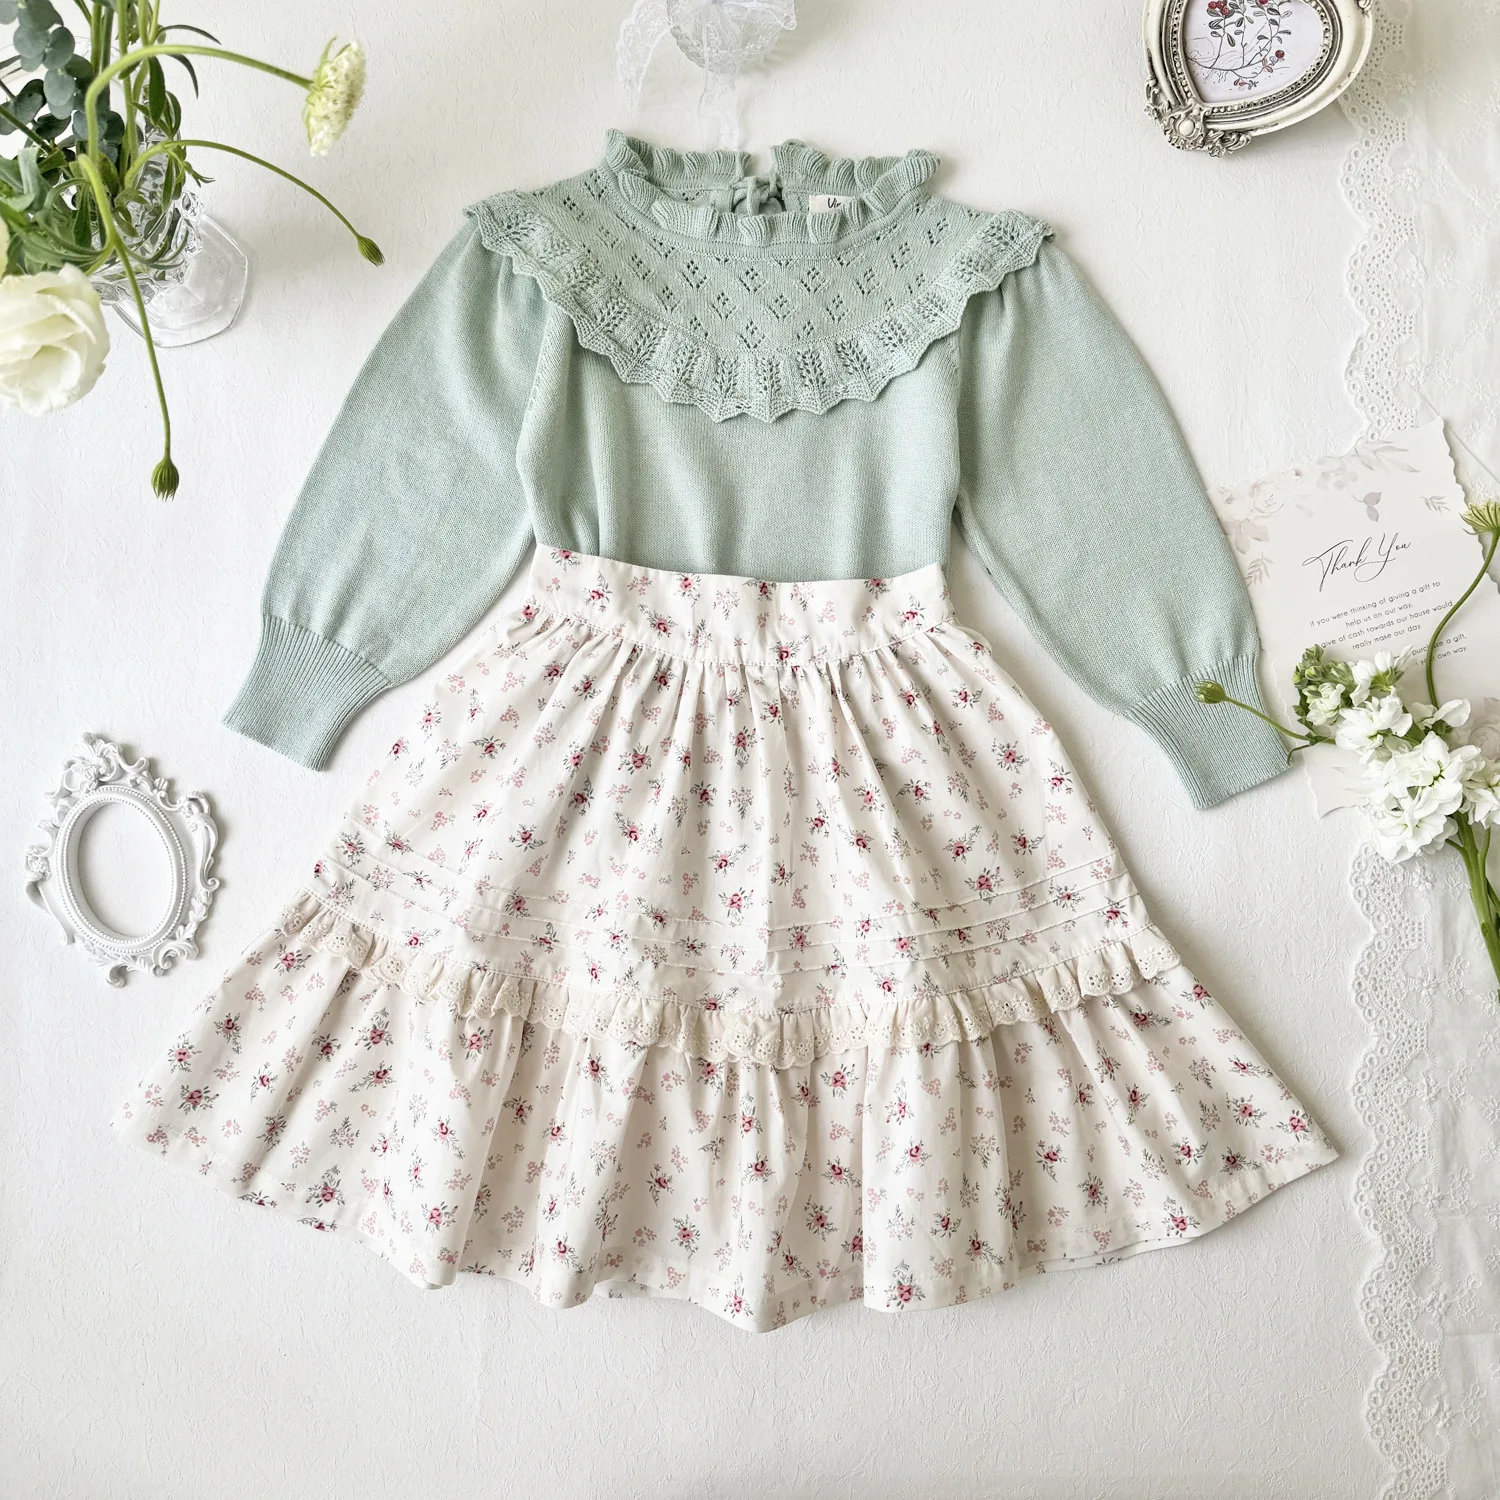 

Spring Summer Floral Print Girls Flower Skirt for Children Clothing Skirt Kids Princess Lace Tutu Baby Clothes Size 2-8T